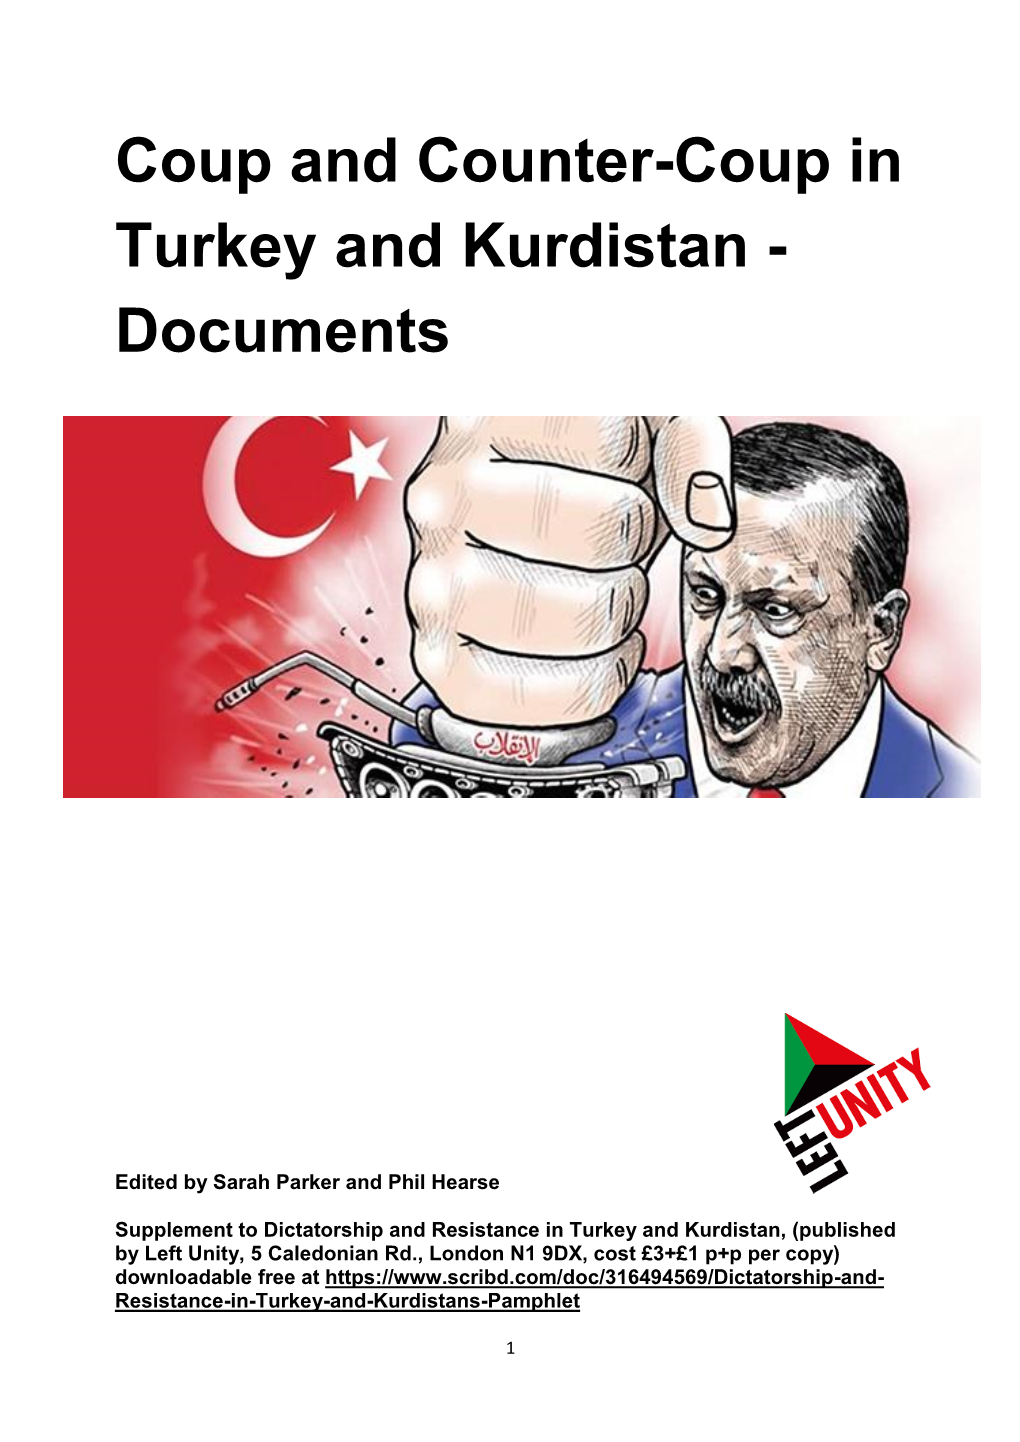 Coup and Counter-Coup in Turkey and Kurdistan - Documents